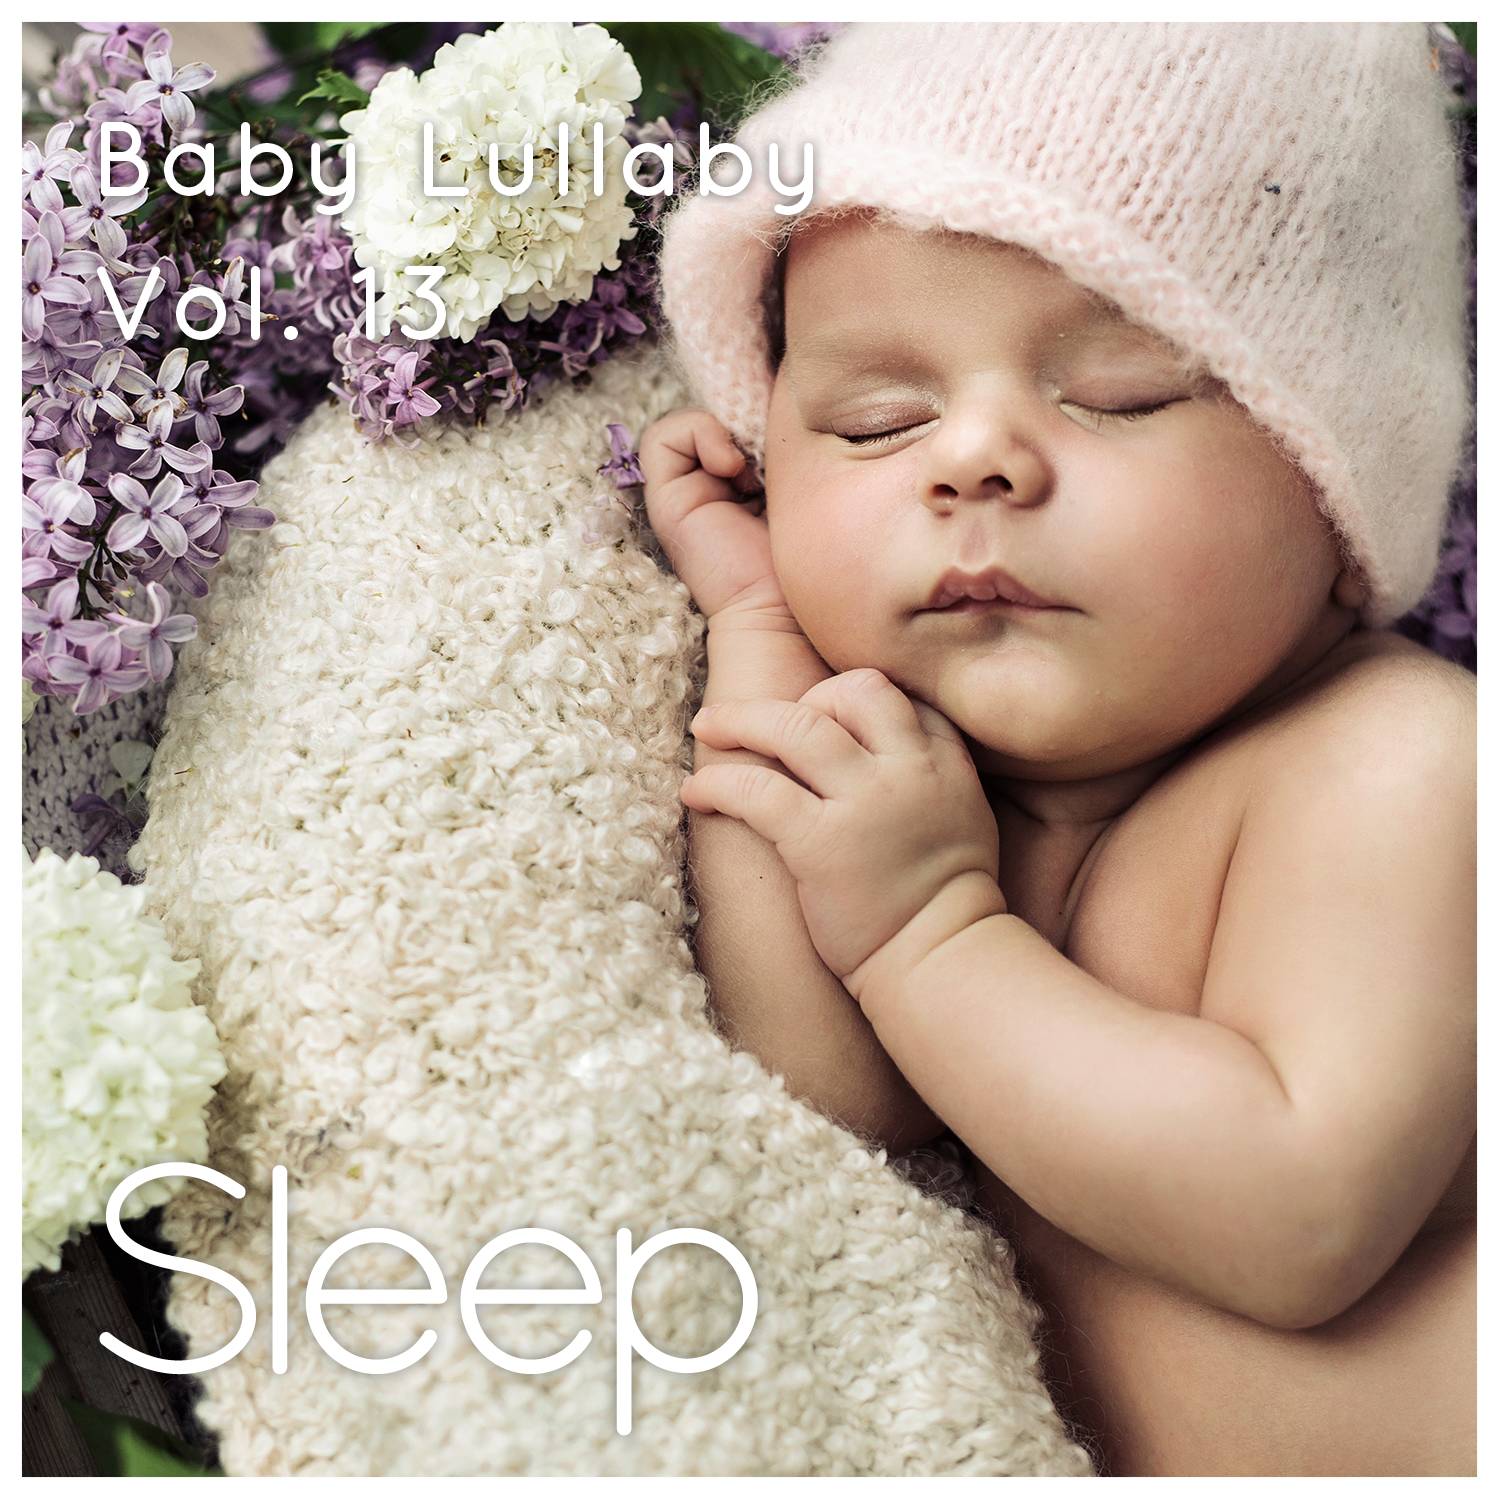 Baby Sleep Ambient Lullaby, Pt. 61